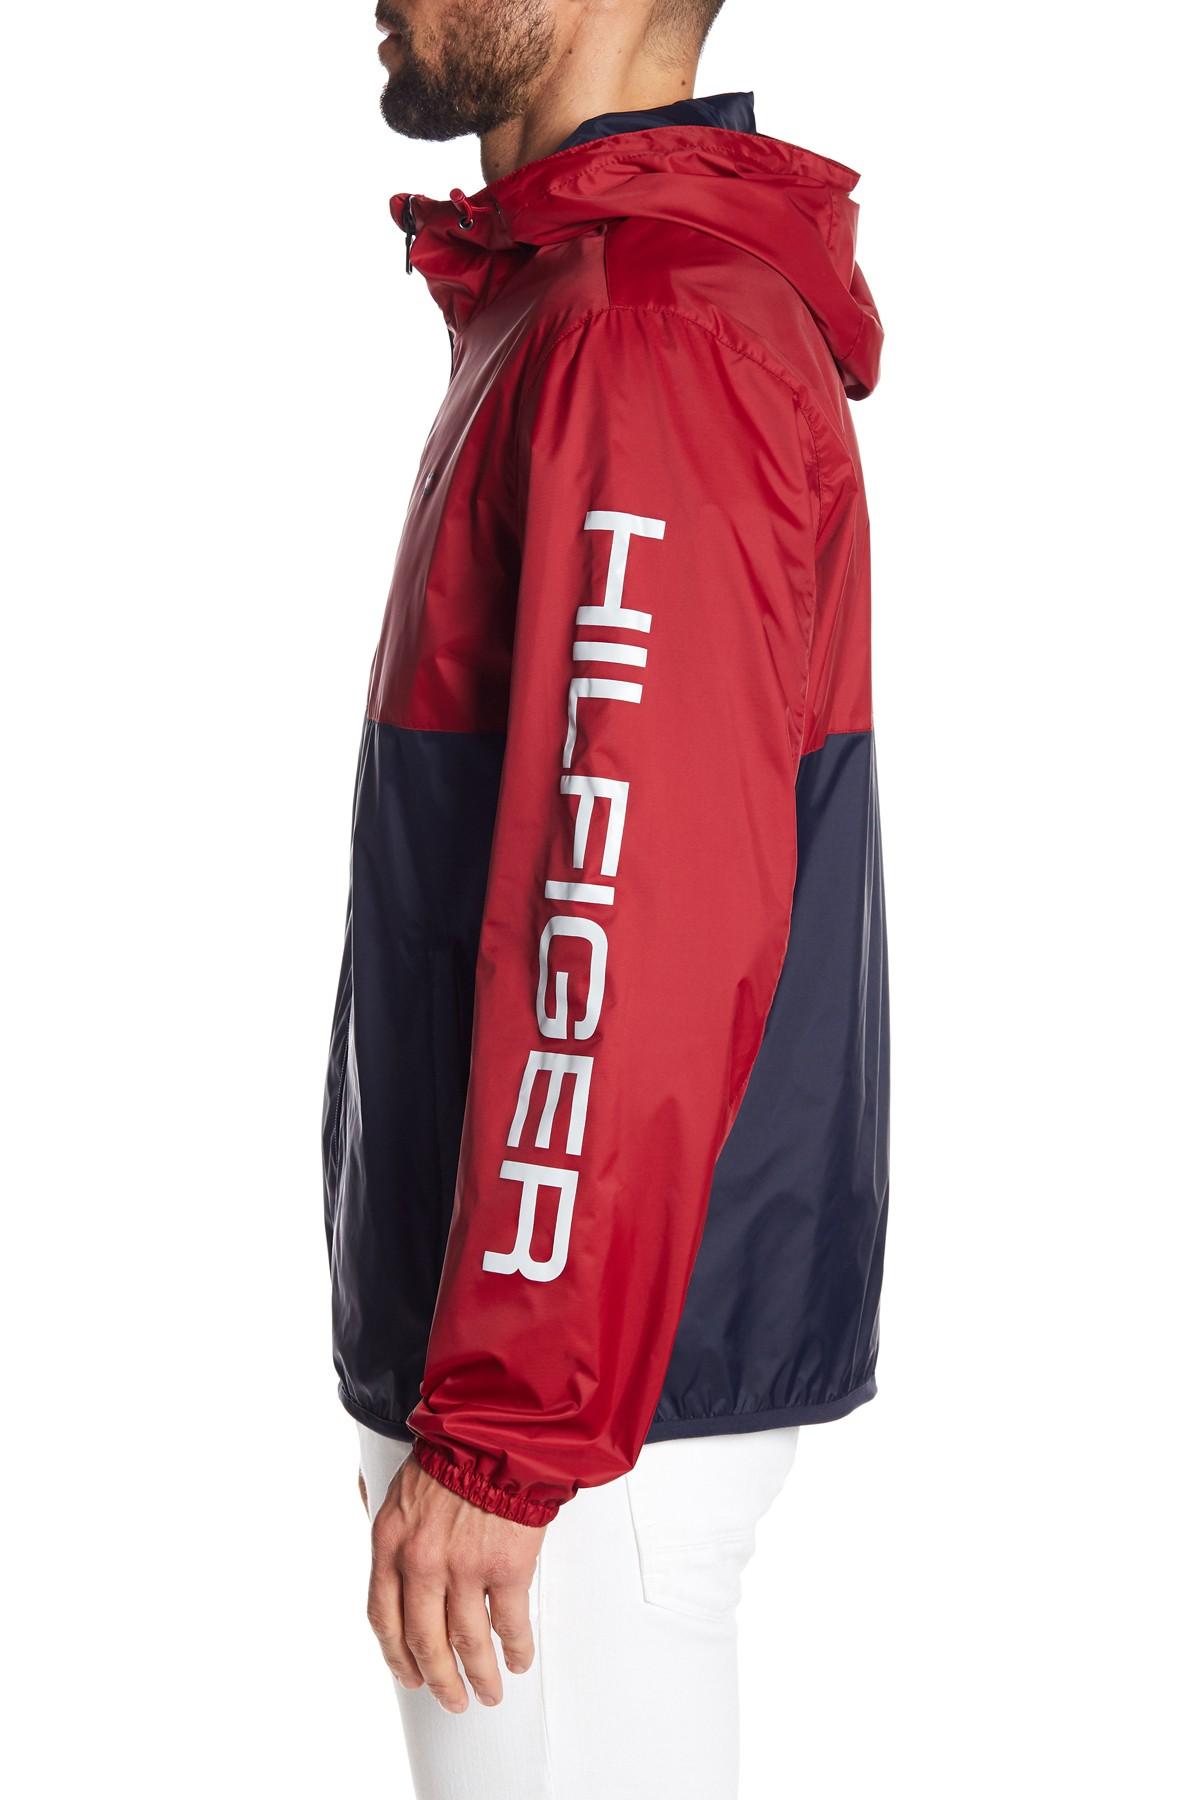 tommy hilfiger red rain jacket Online Shopping mall | Find the best ...